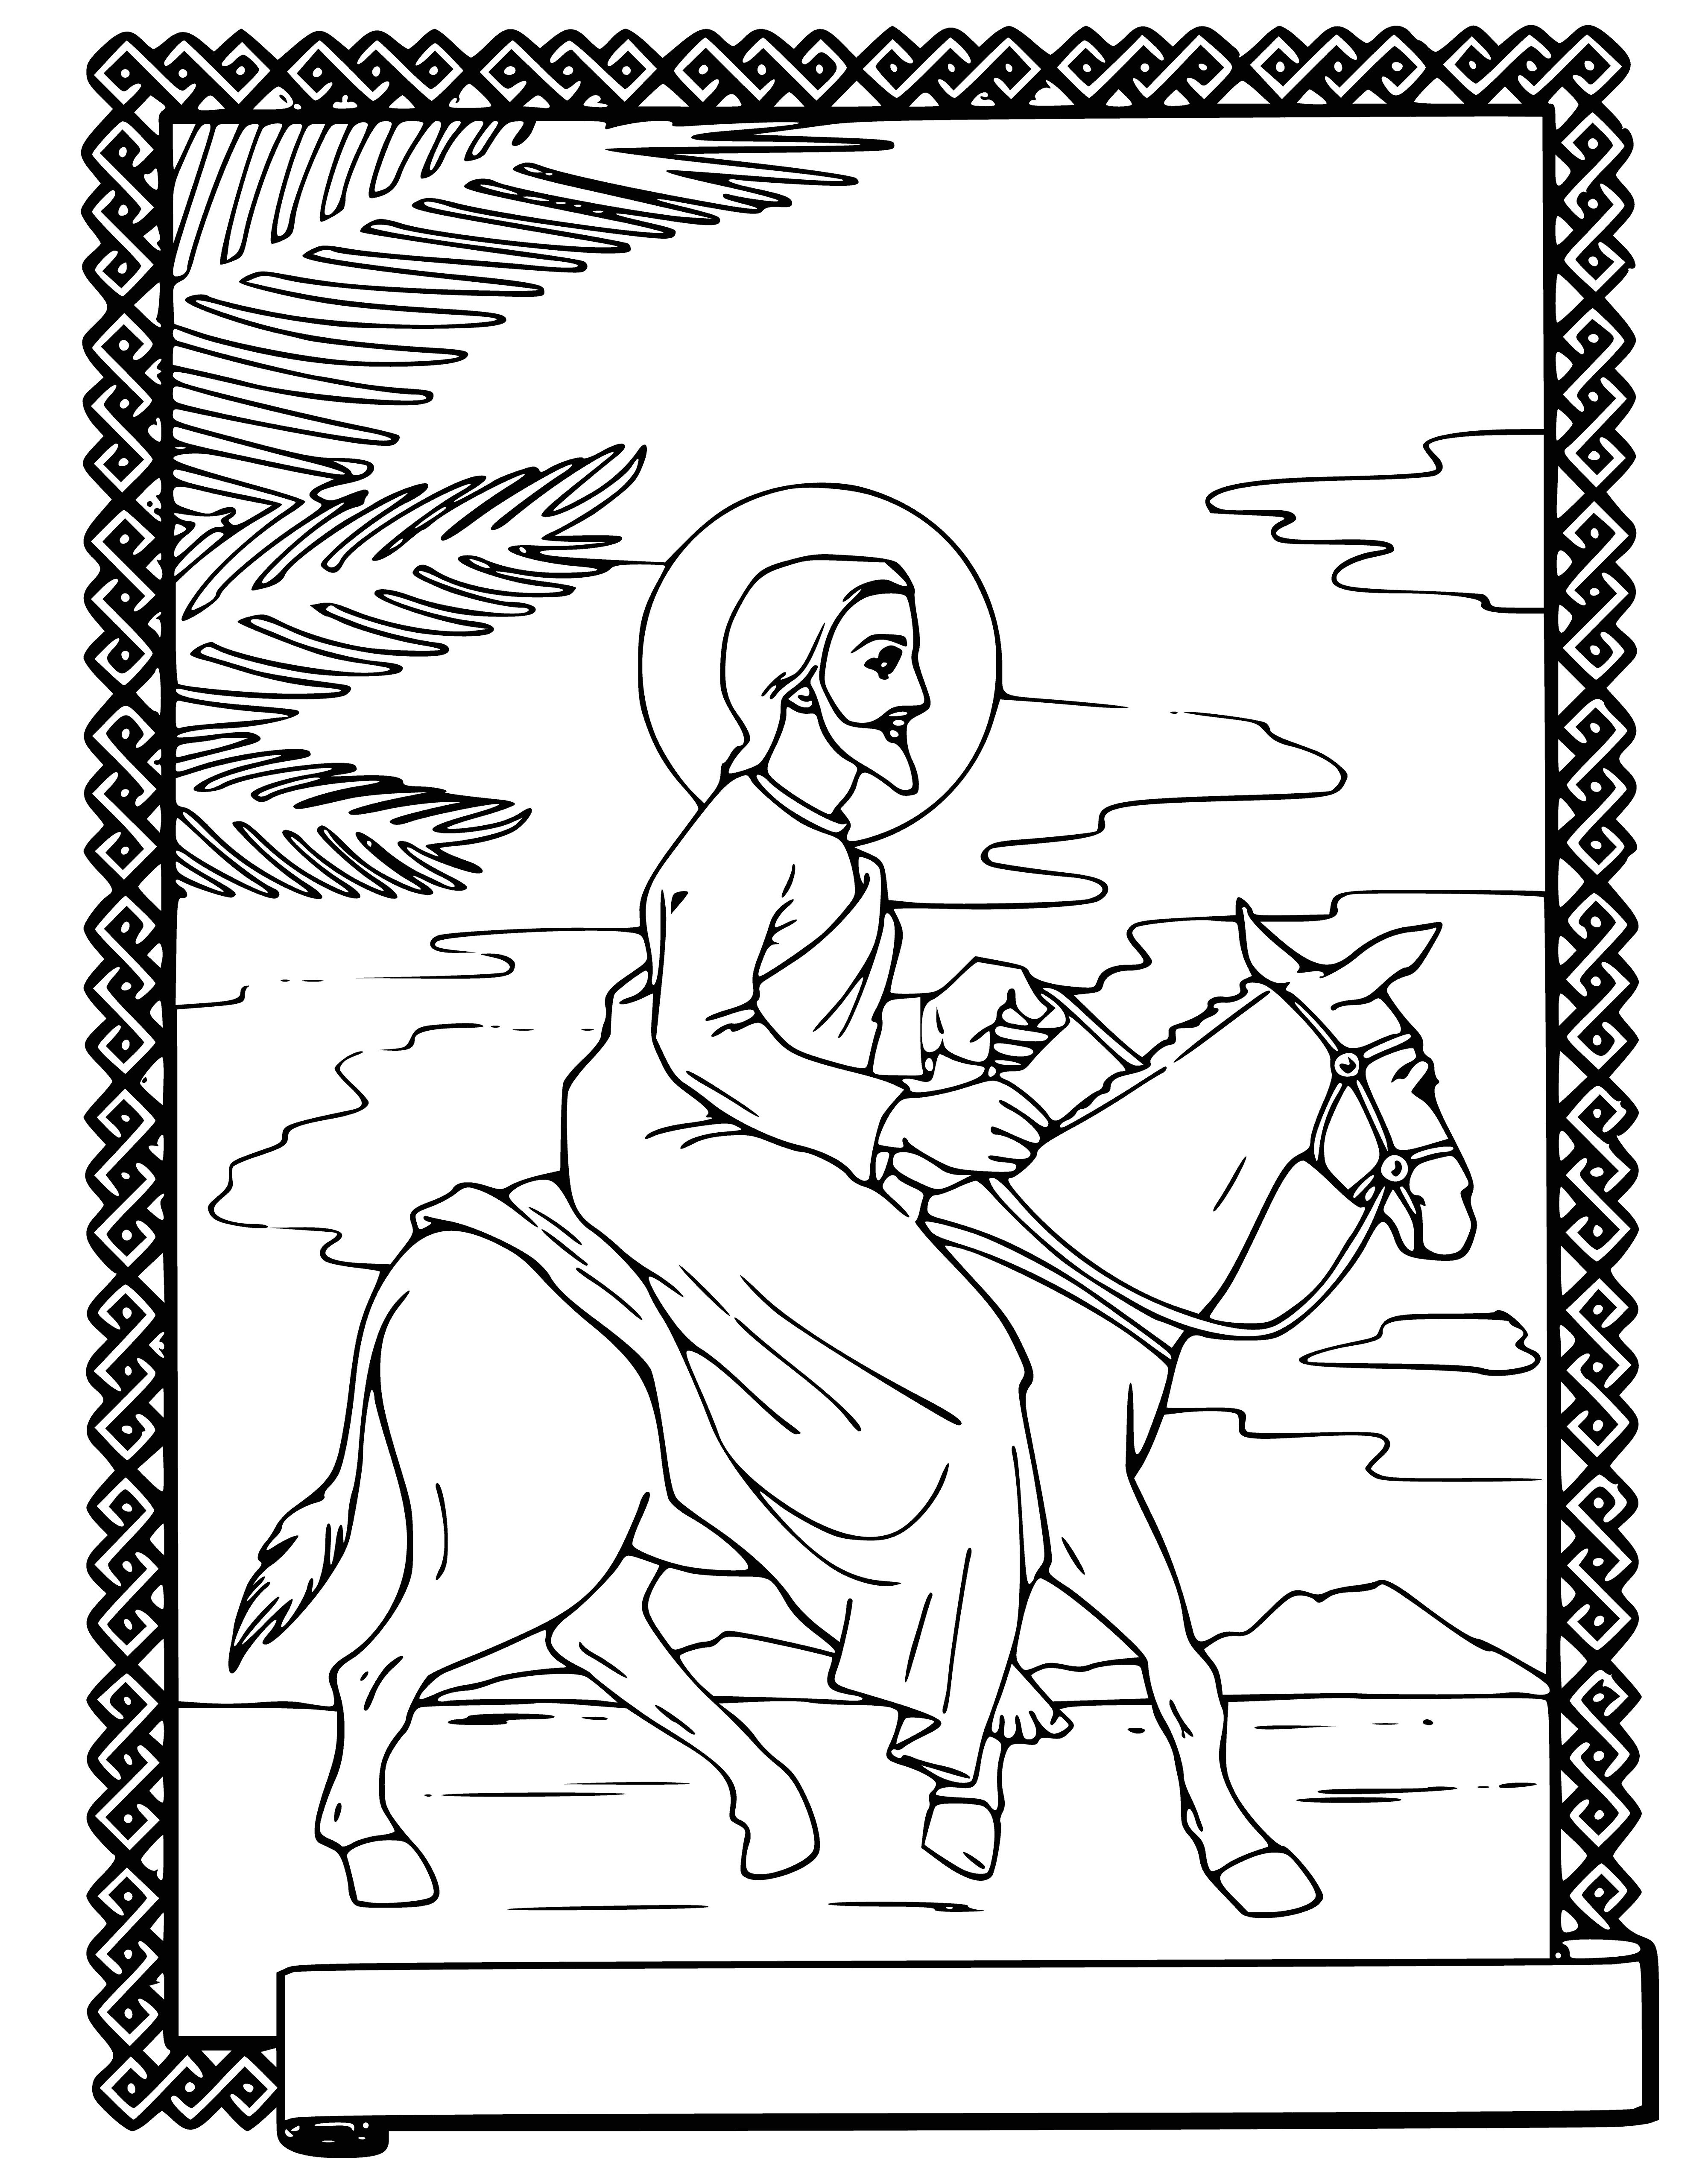 Entry of the Lord into Jerusalem coloring page